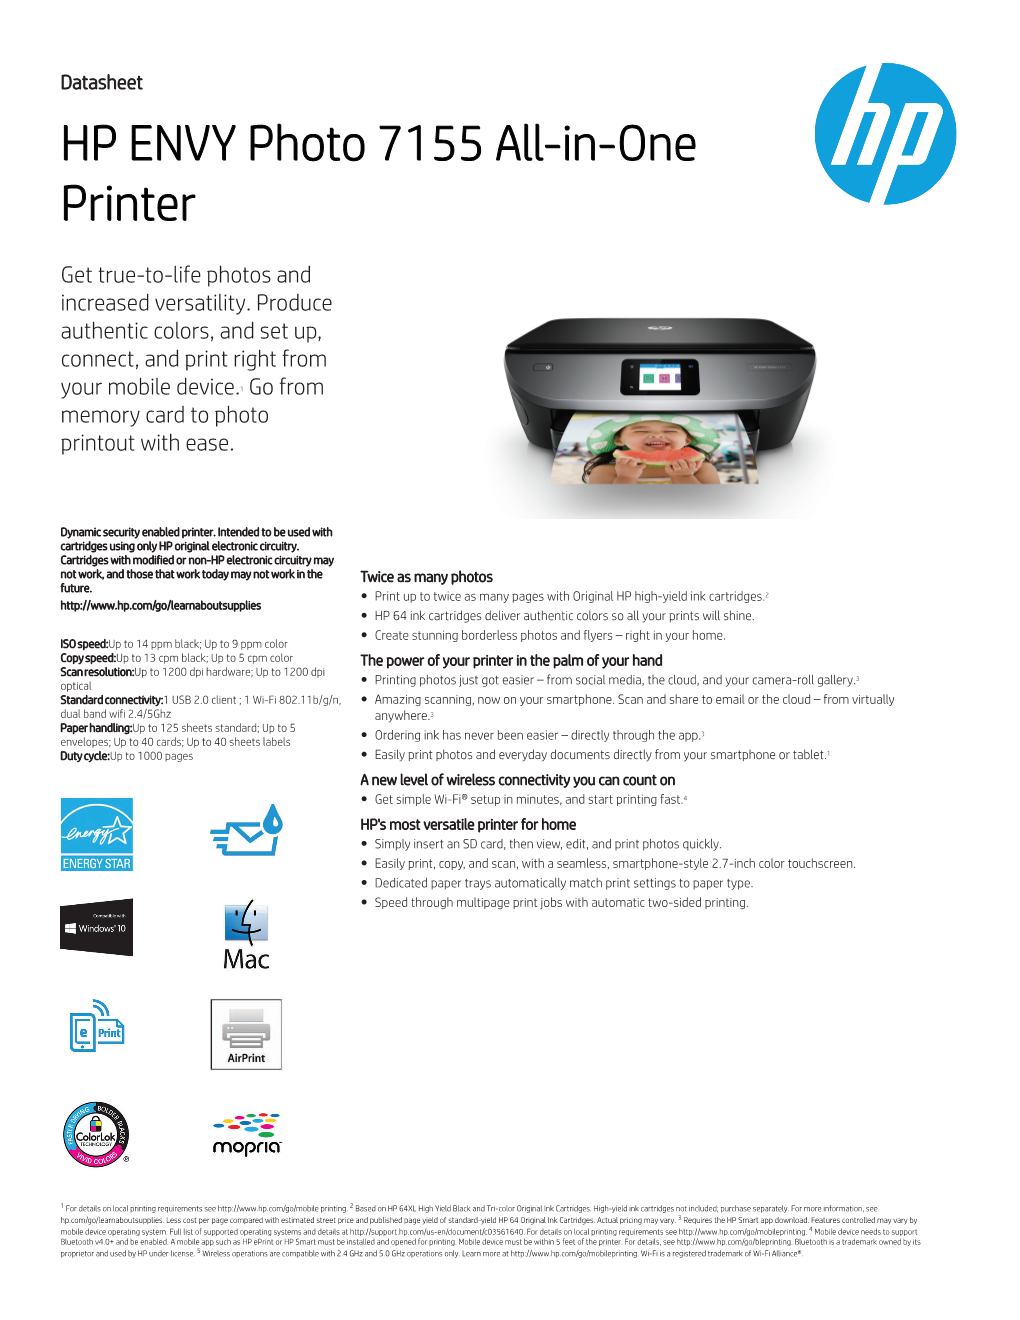 HP ENVY Photo 7155 All-In-One Printer